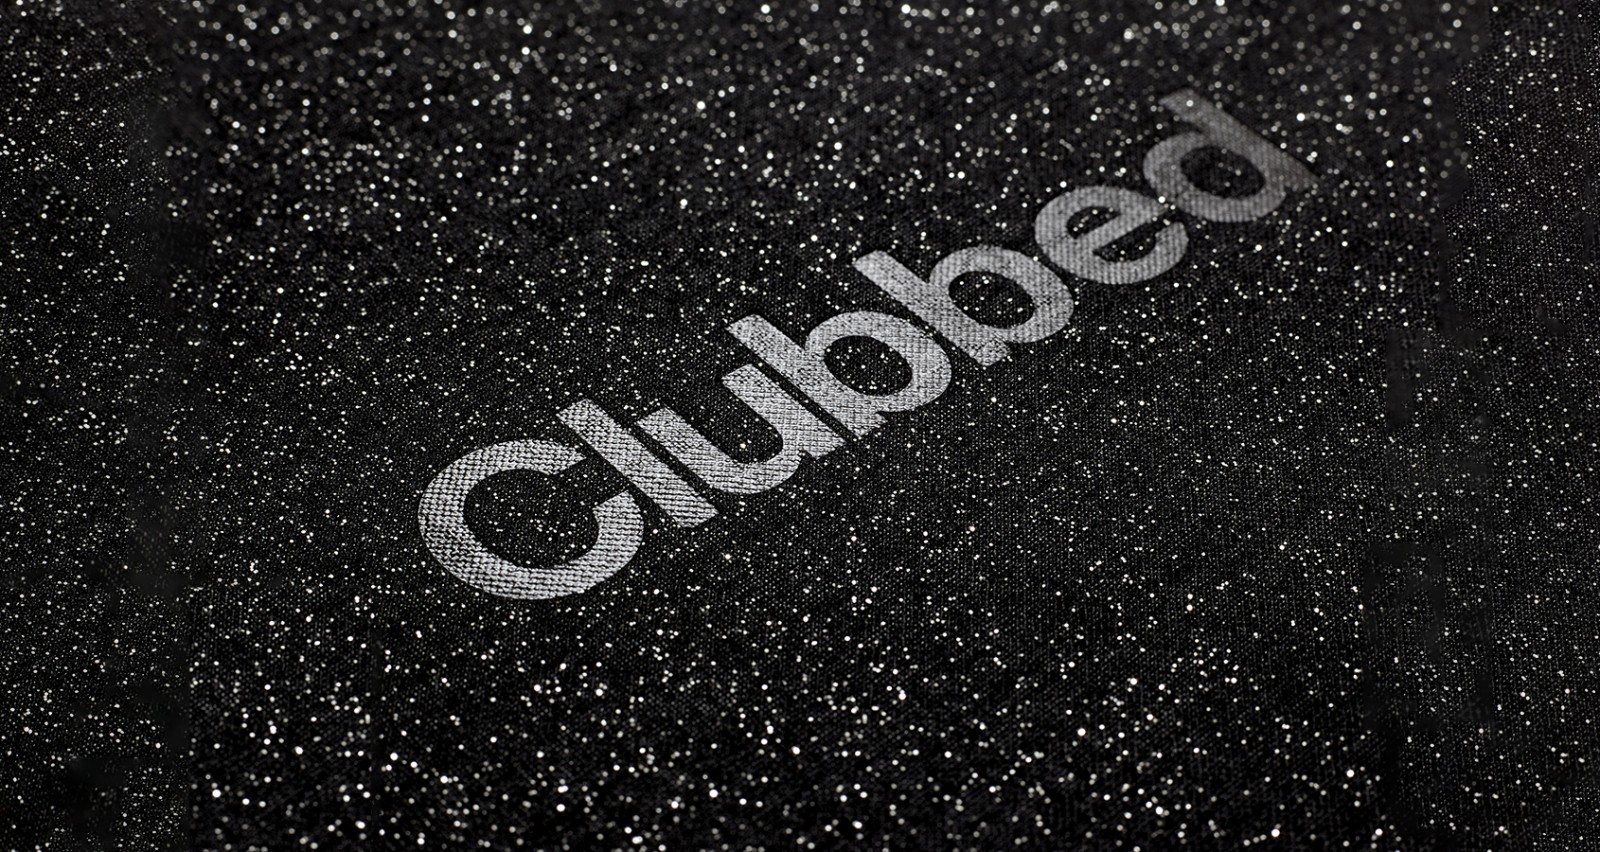 Clubbed: an interview with Rick Banks